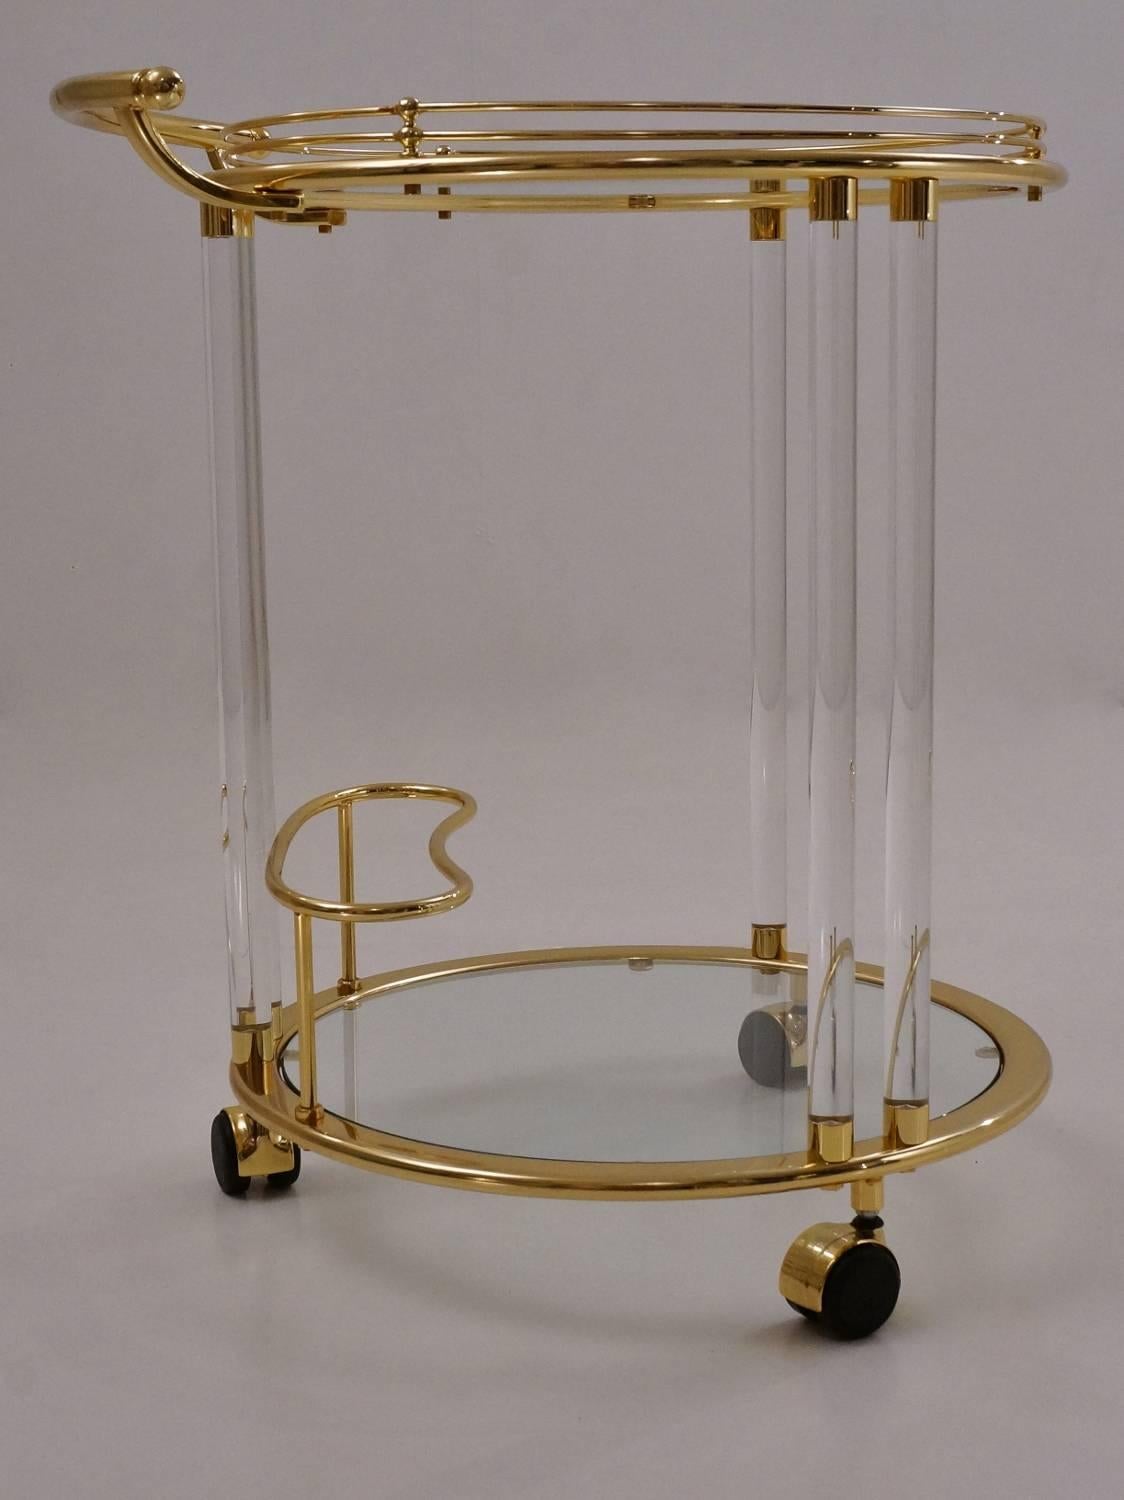 Neoclassical Lucite, Glass and Brass Bar Cart or Trolley by Orsenigo, Italy, circa 1980 For Sale